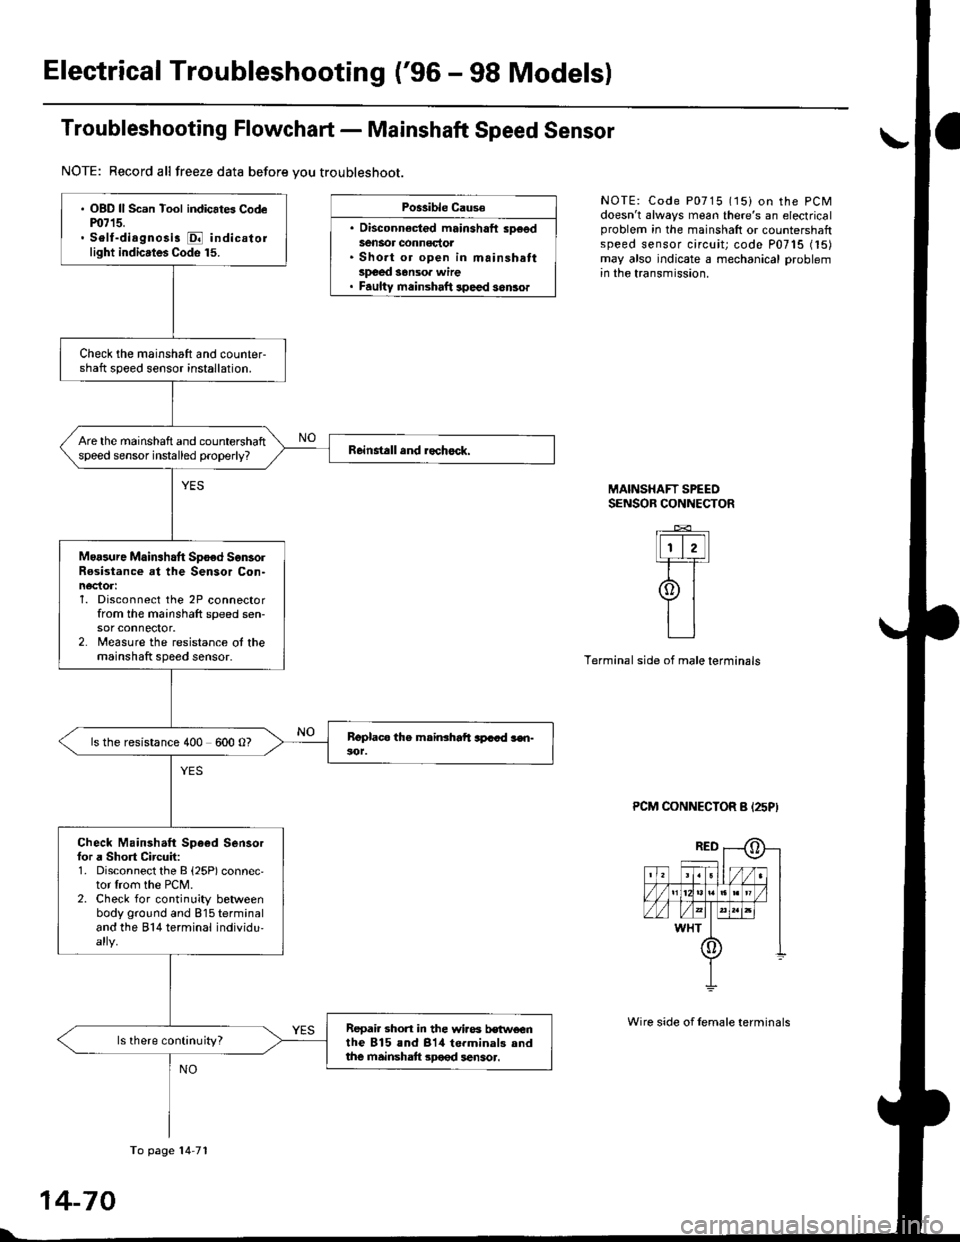 HONDA CIVIC 1999 6.G Workshop Manual Electrical Troubleshooting (96 - 98 Modelsl
Troubleshooting Flowchart - Mainshaft Speed Sensor
NOTE: Record all freeze data before you troubleshoot.
Po$ible Cause
. Disconnect€d mainshaft sD€edSe